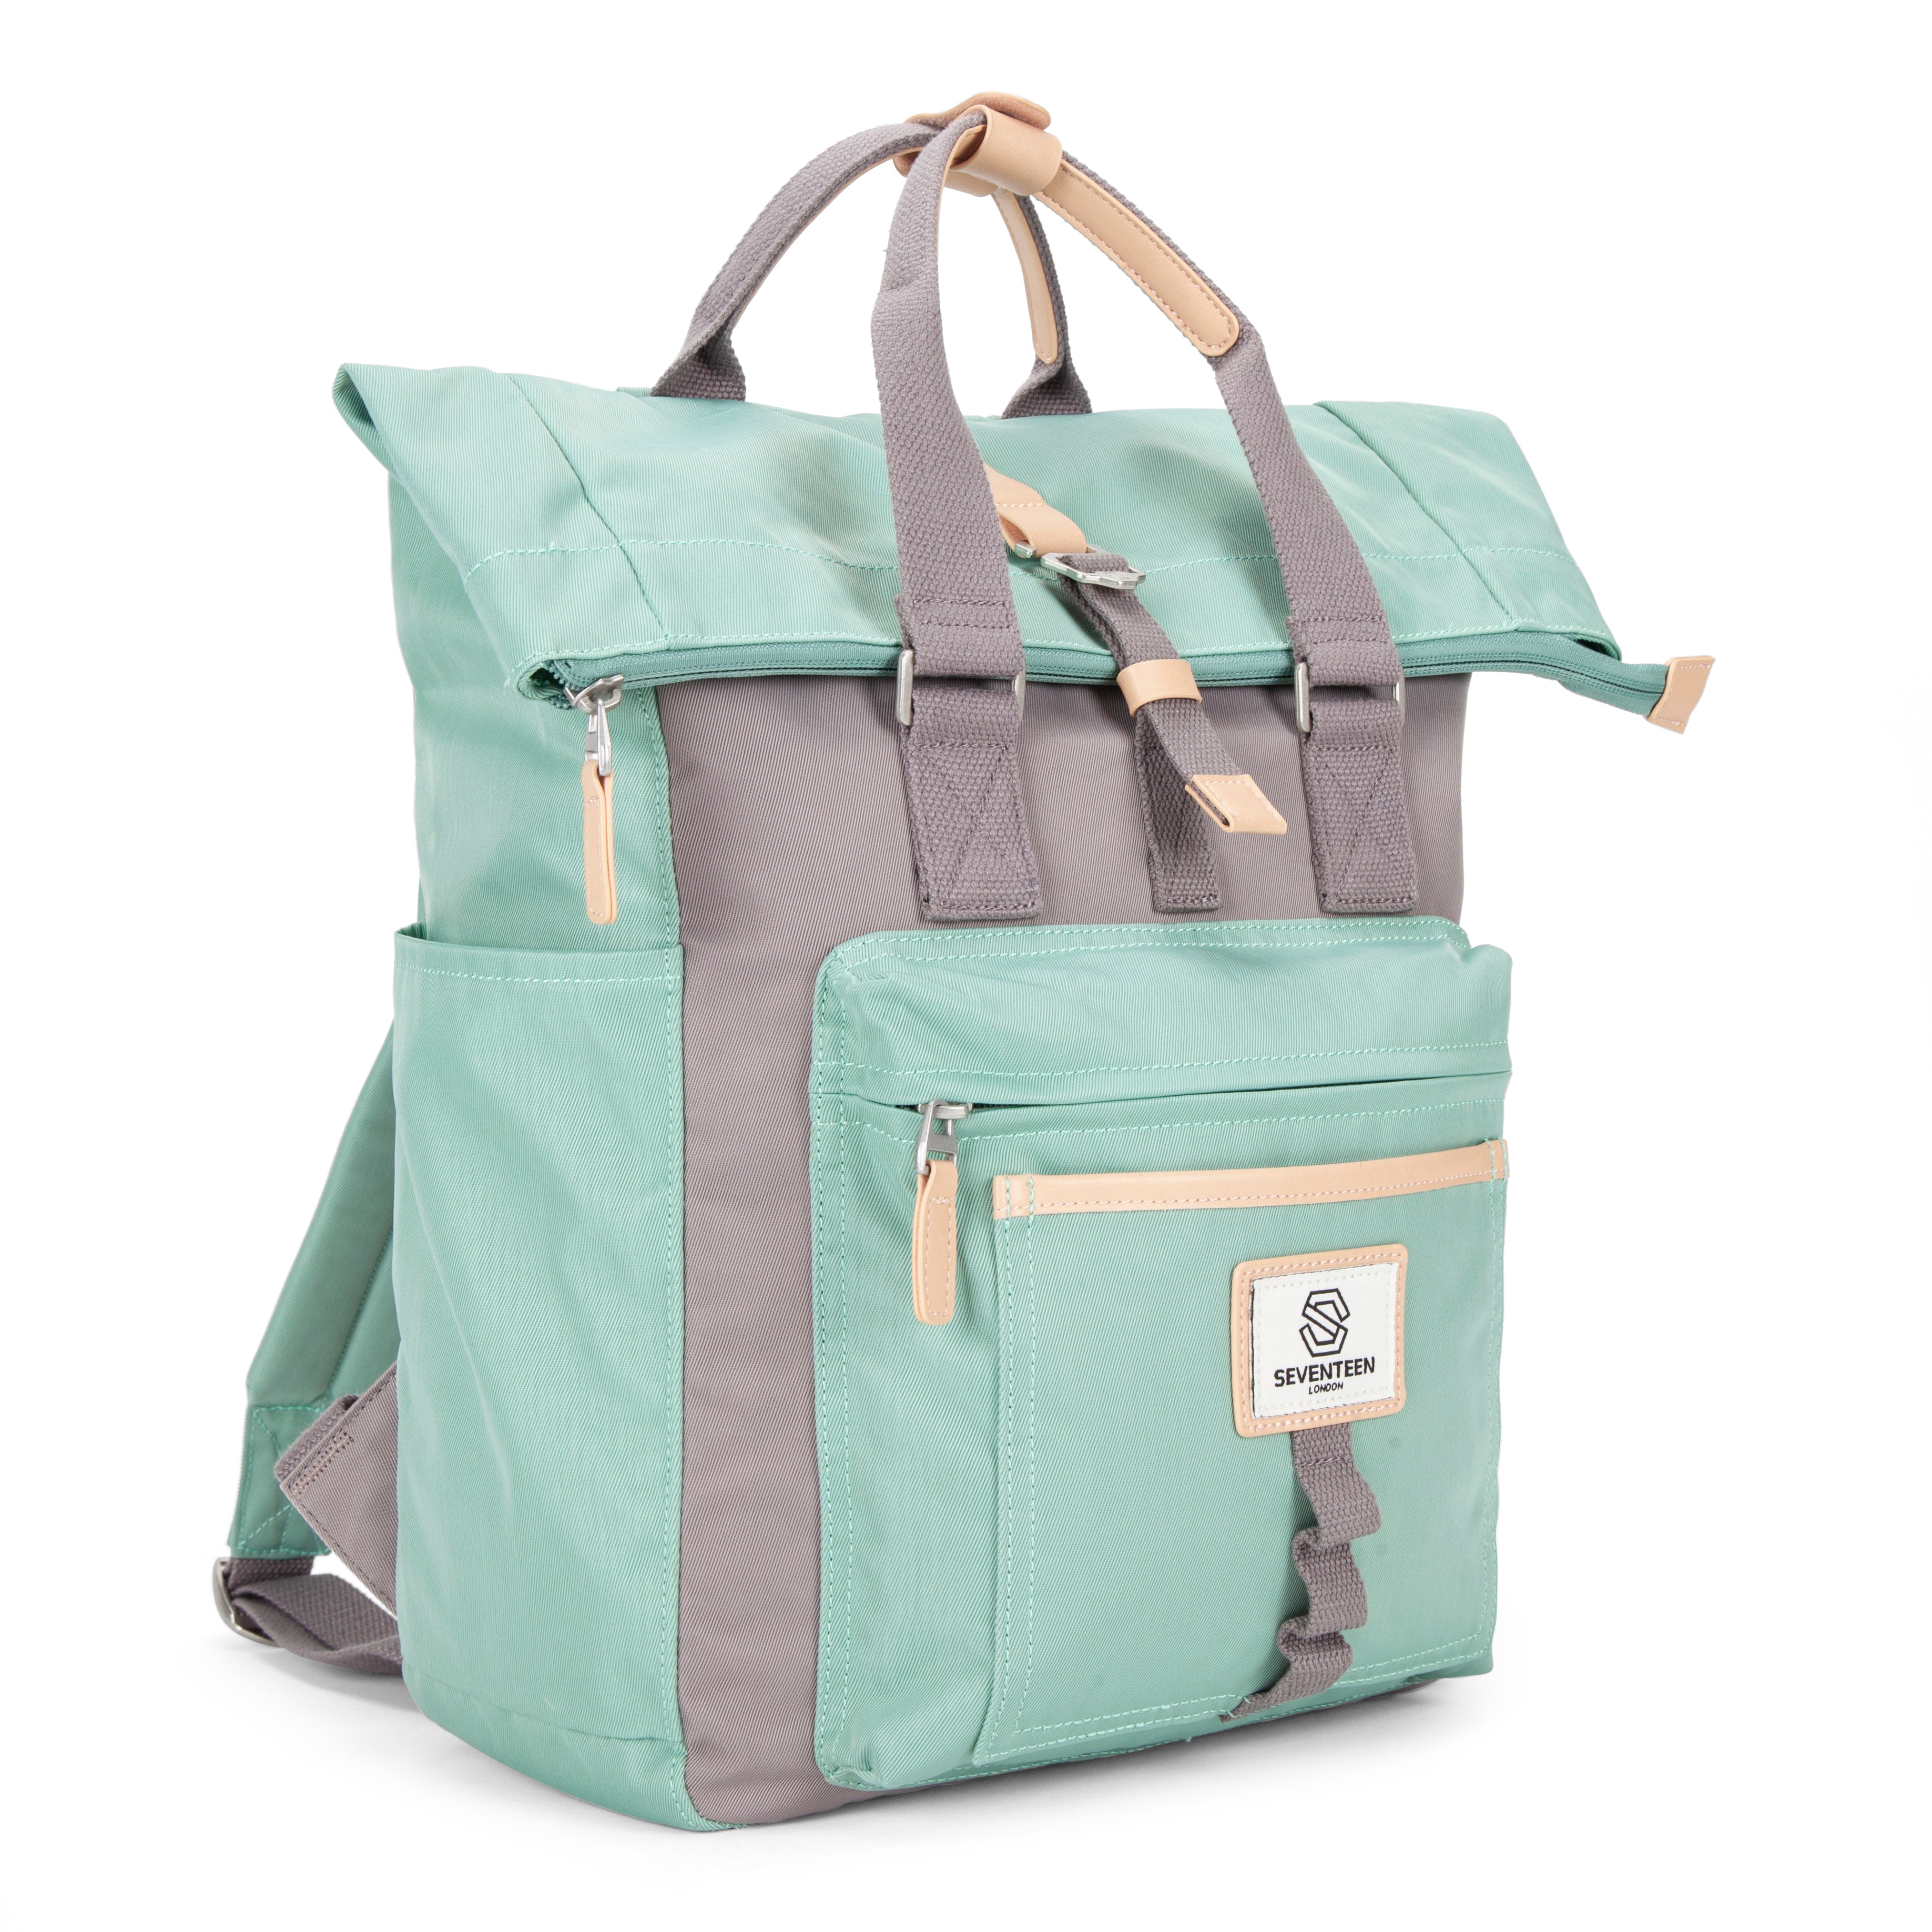 Canary Wharf Backpack - Pastel Green with Grey - Seventeen London